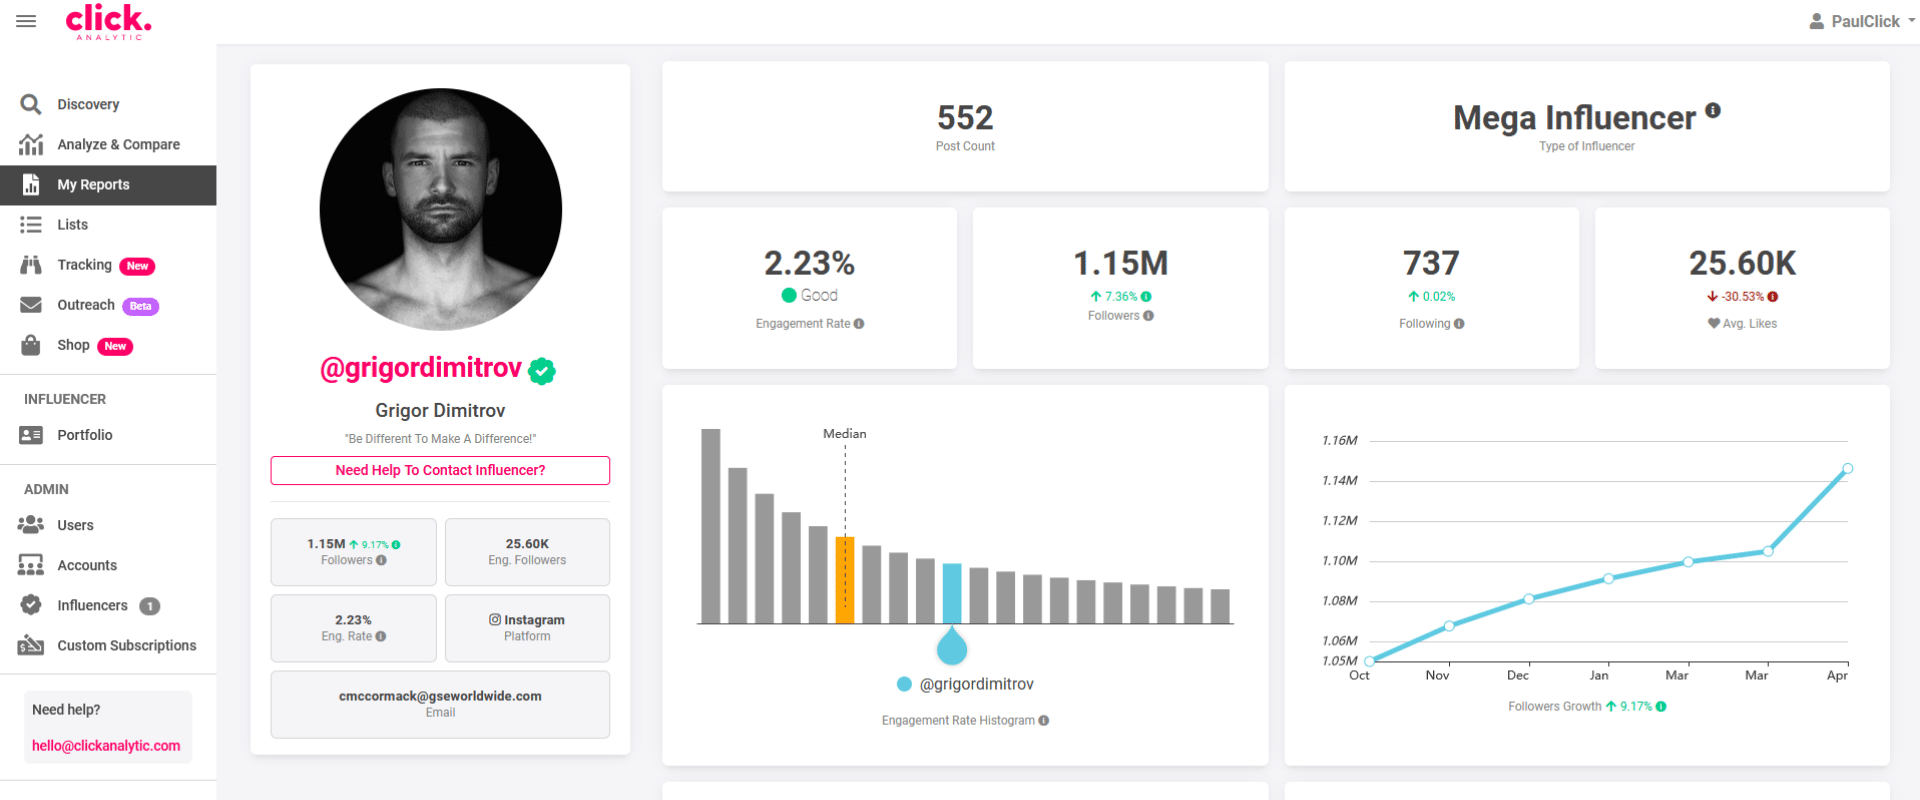 Screenshot of a social media analytics dashboard featuring profile information and engagement metrics for an influencer named grigor dimitrov.